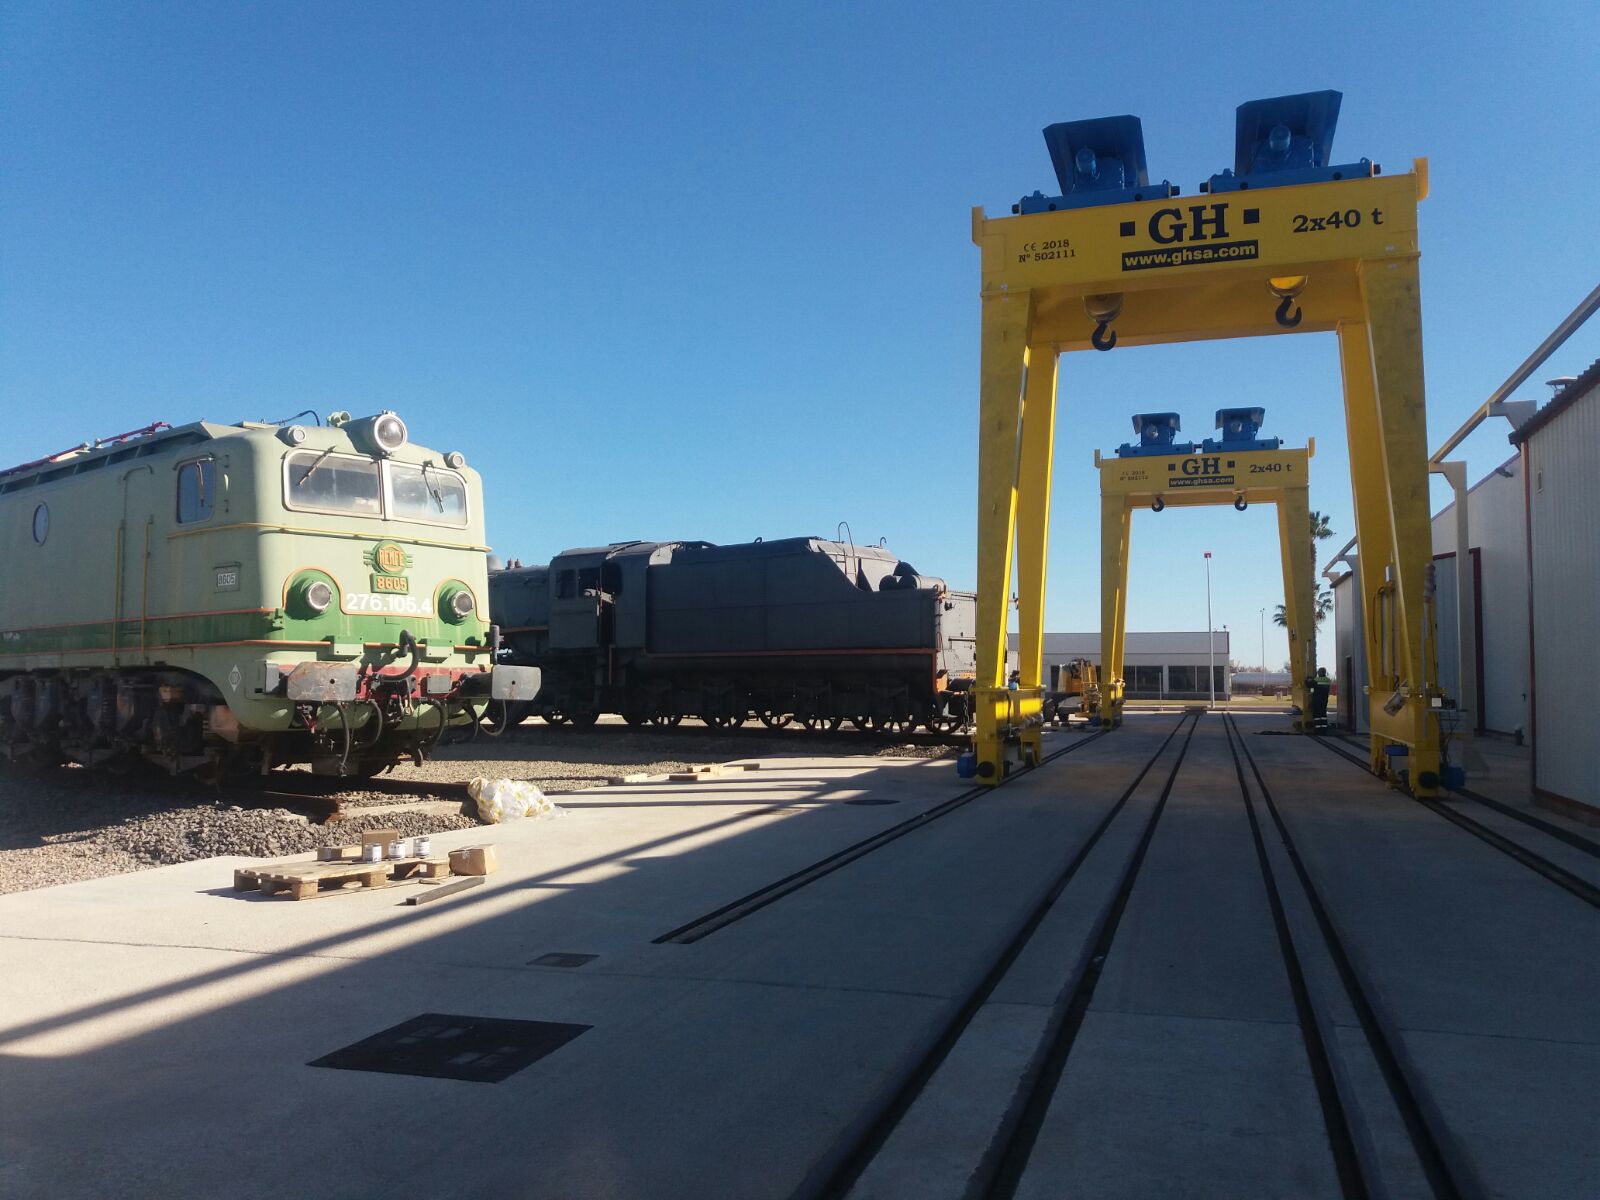 Locomotive loading and lifting tests with two new gantry cranes for Stadler Valencia